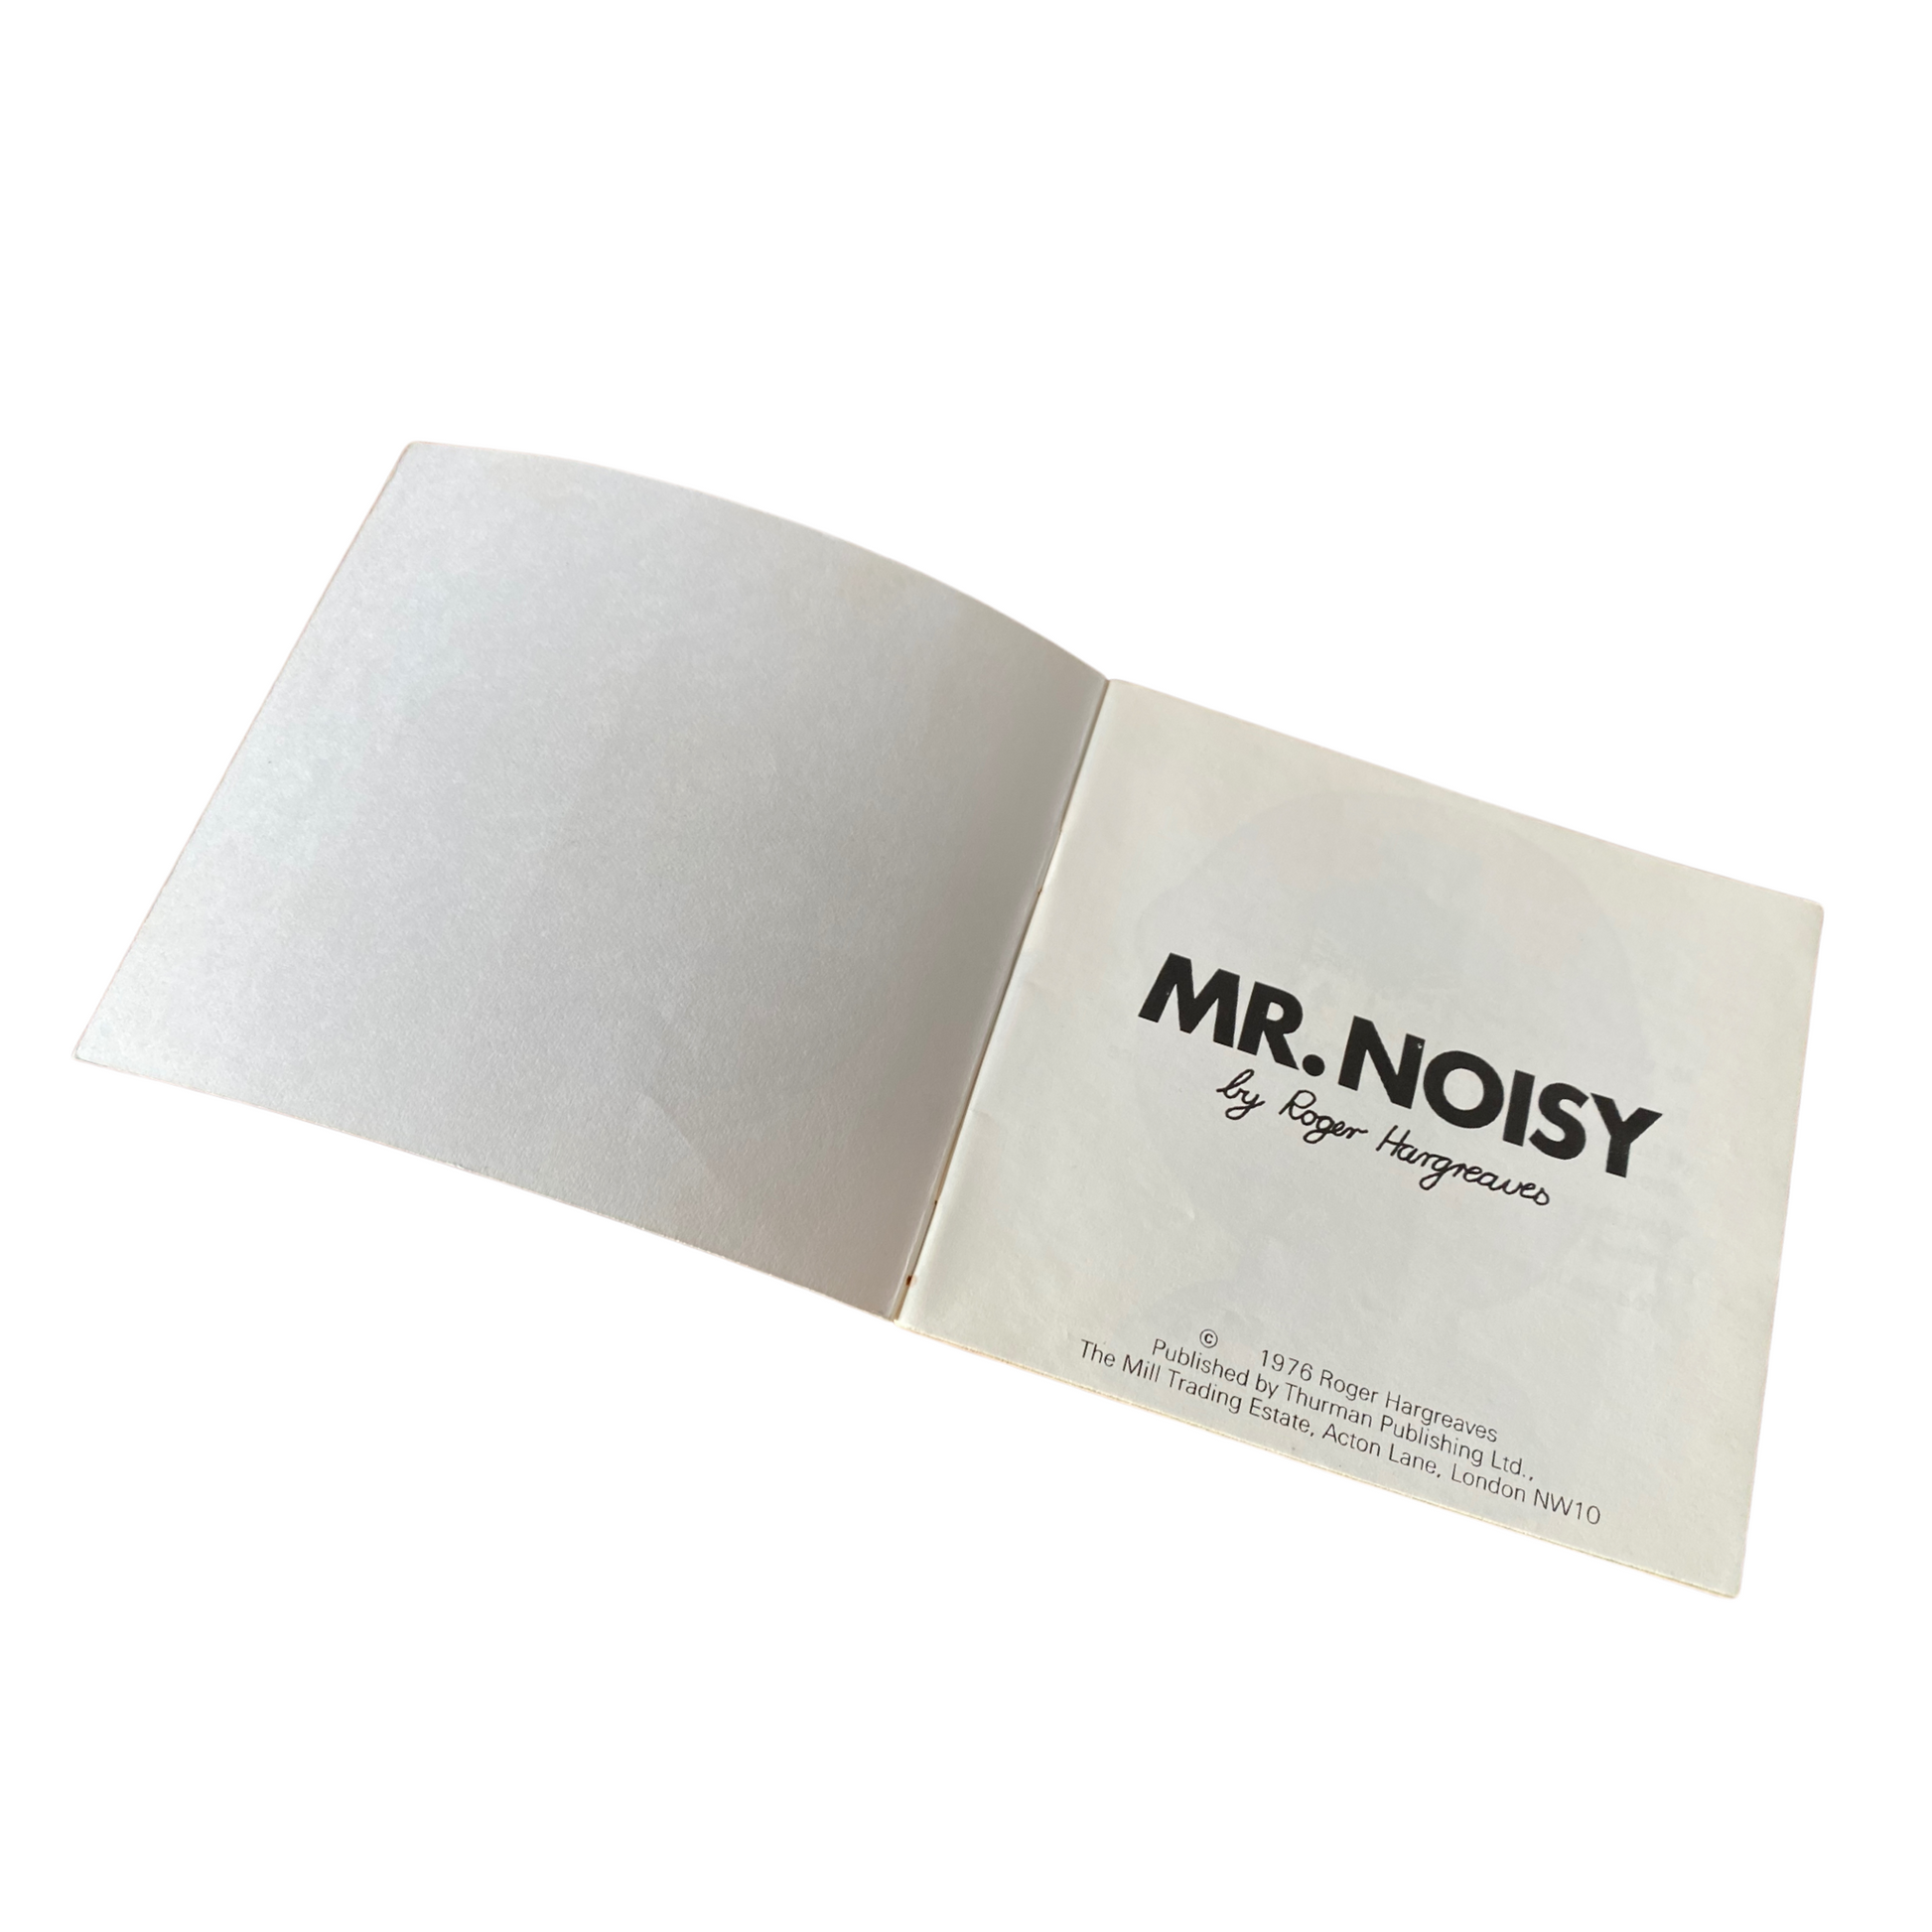 Retro Mr. Men Book -   Mr Noisy    - 1976 Edition by Roger Hargreaves